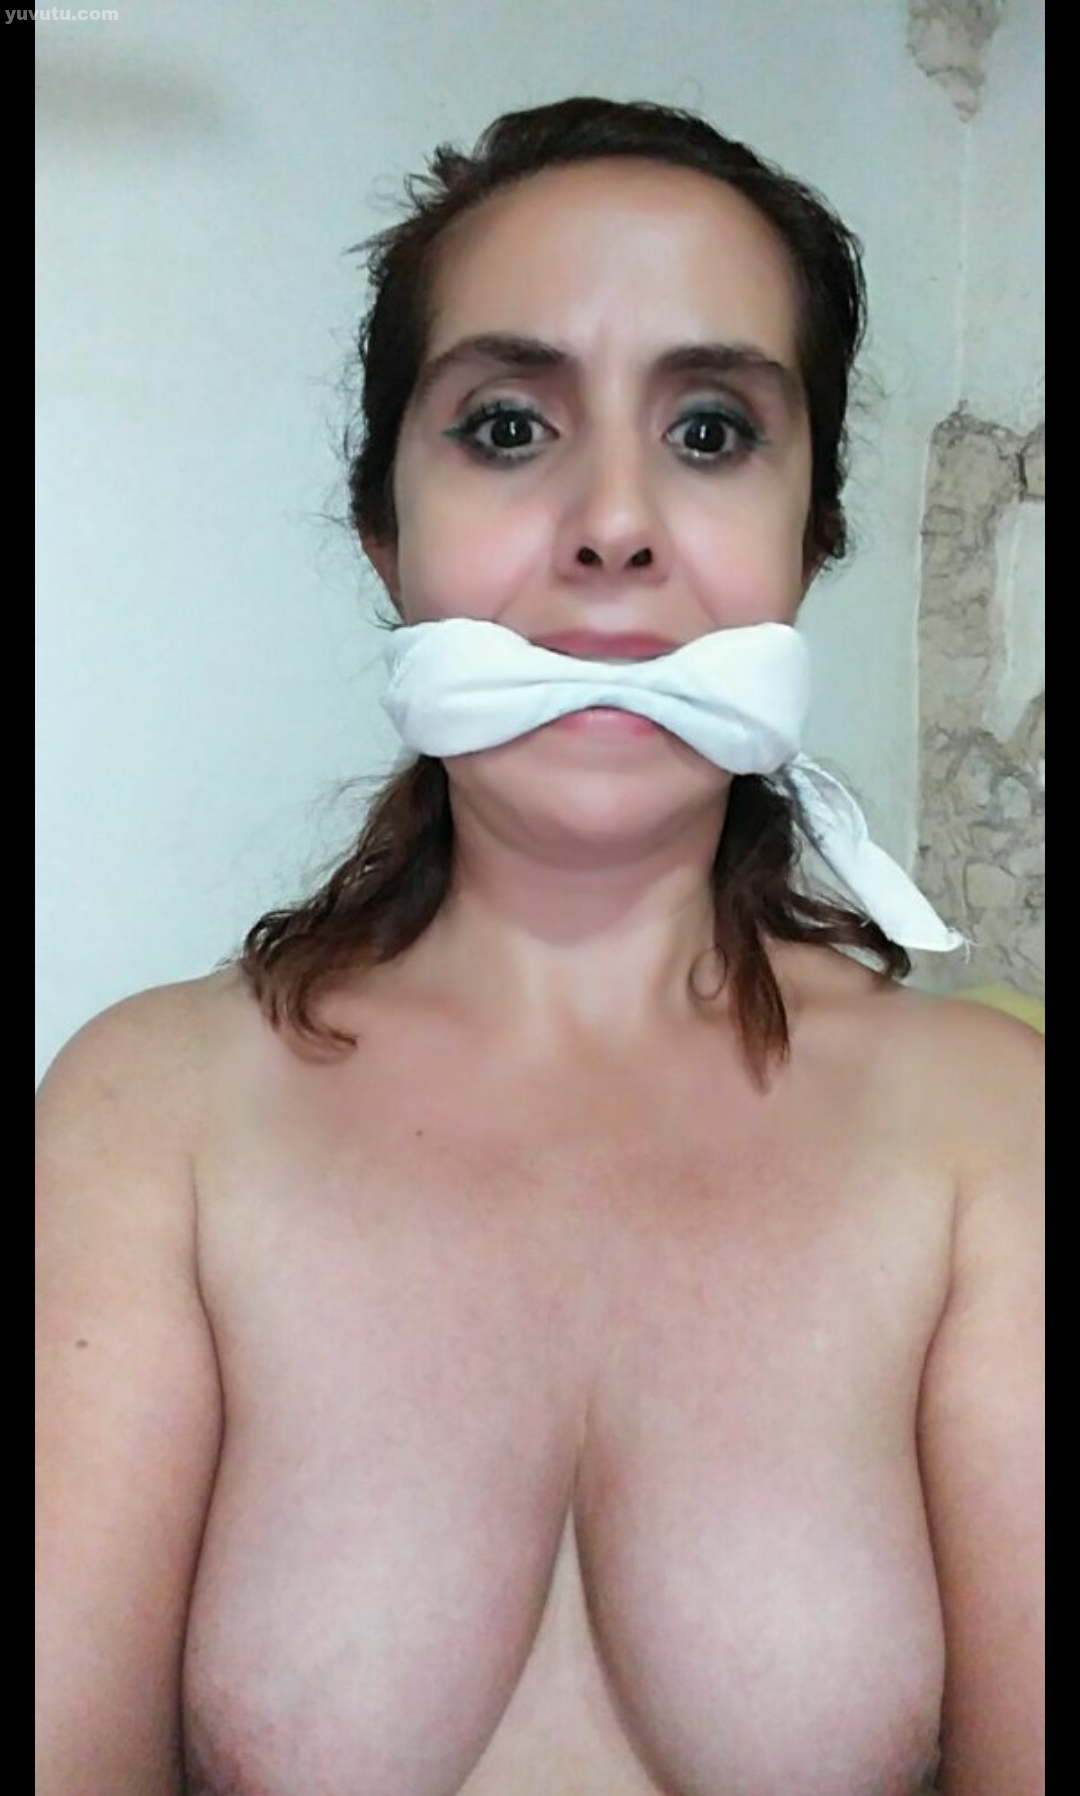 Homemade Gagging Sex - Mexican slut chained and gagged - Anal On Yuvutu Homemade ...